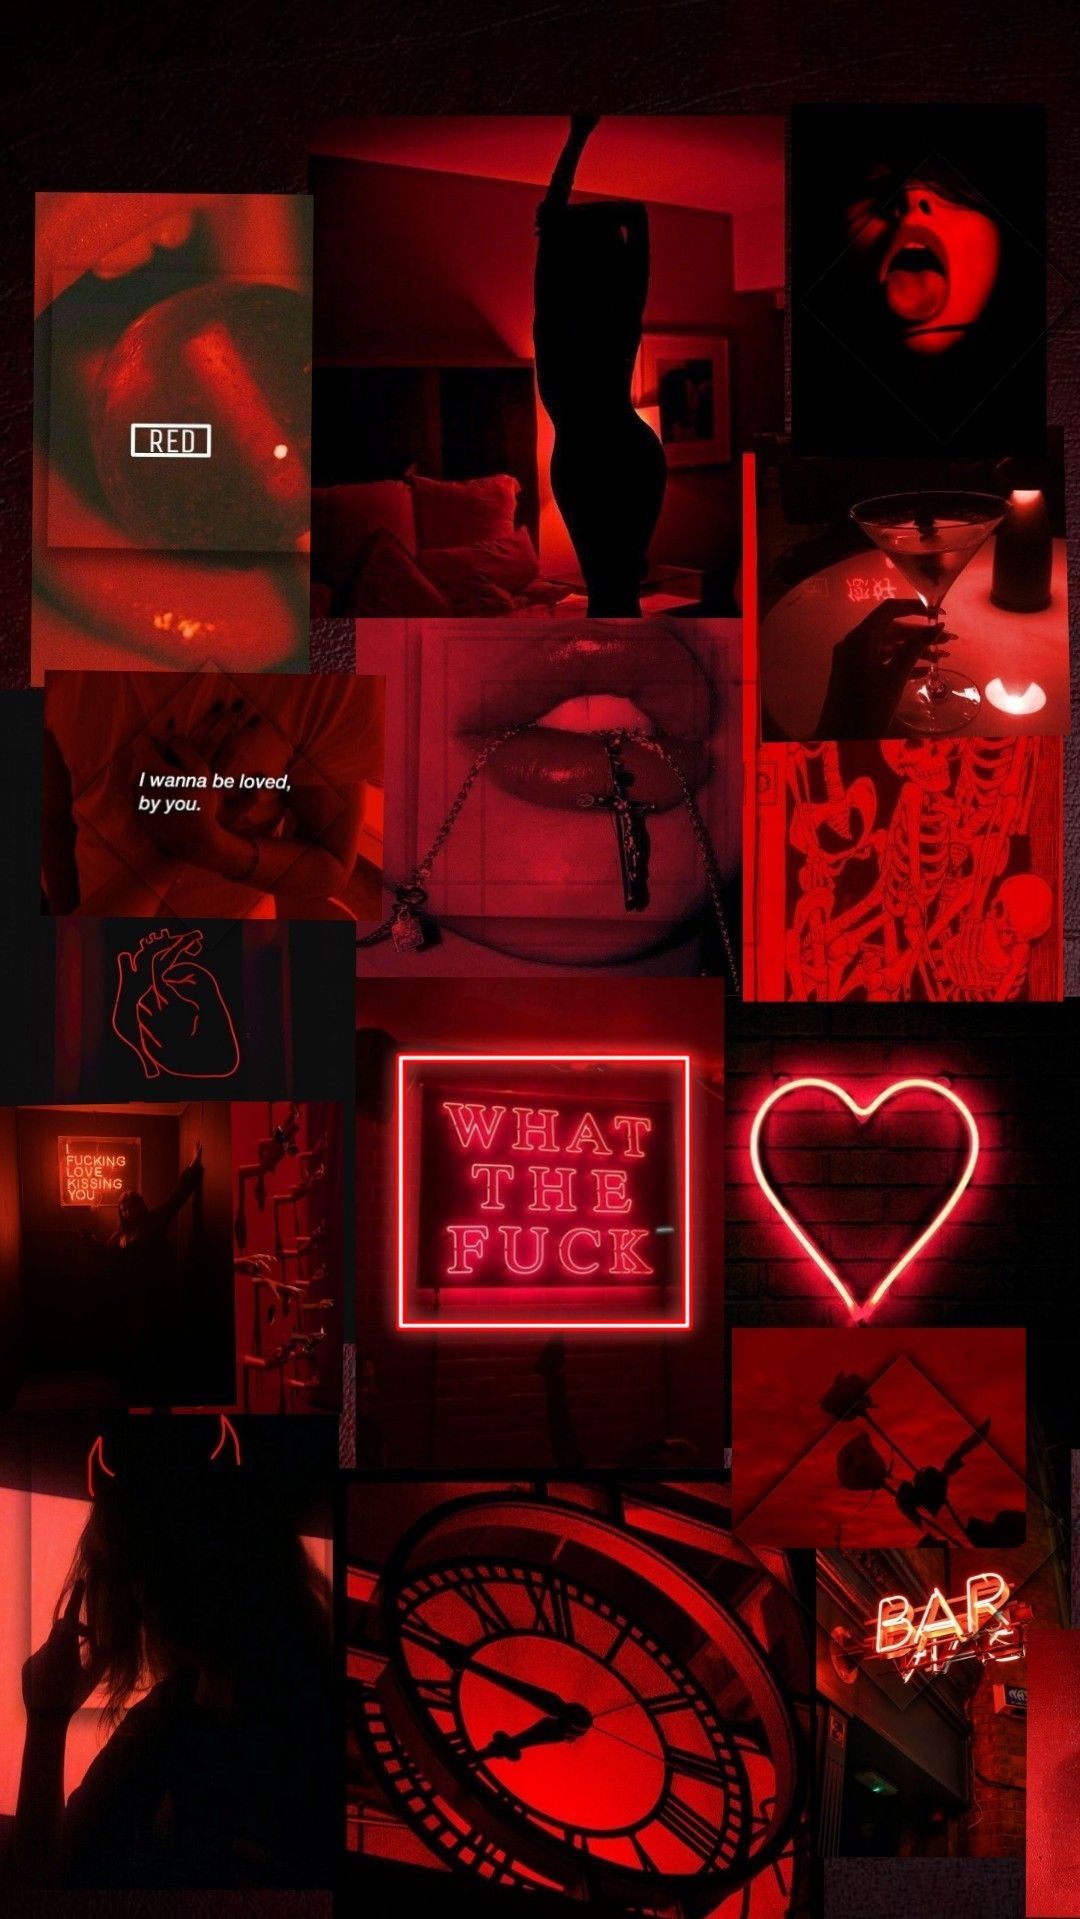 wallpaper Red. iPhone wallpaper themes, Aesthetic iphone wallpaper, Wallpaper iphone neon